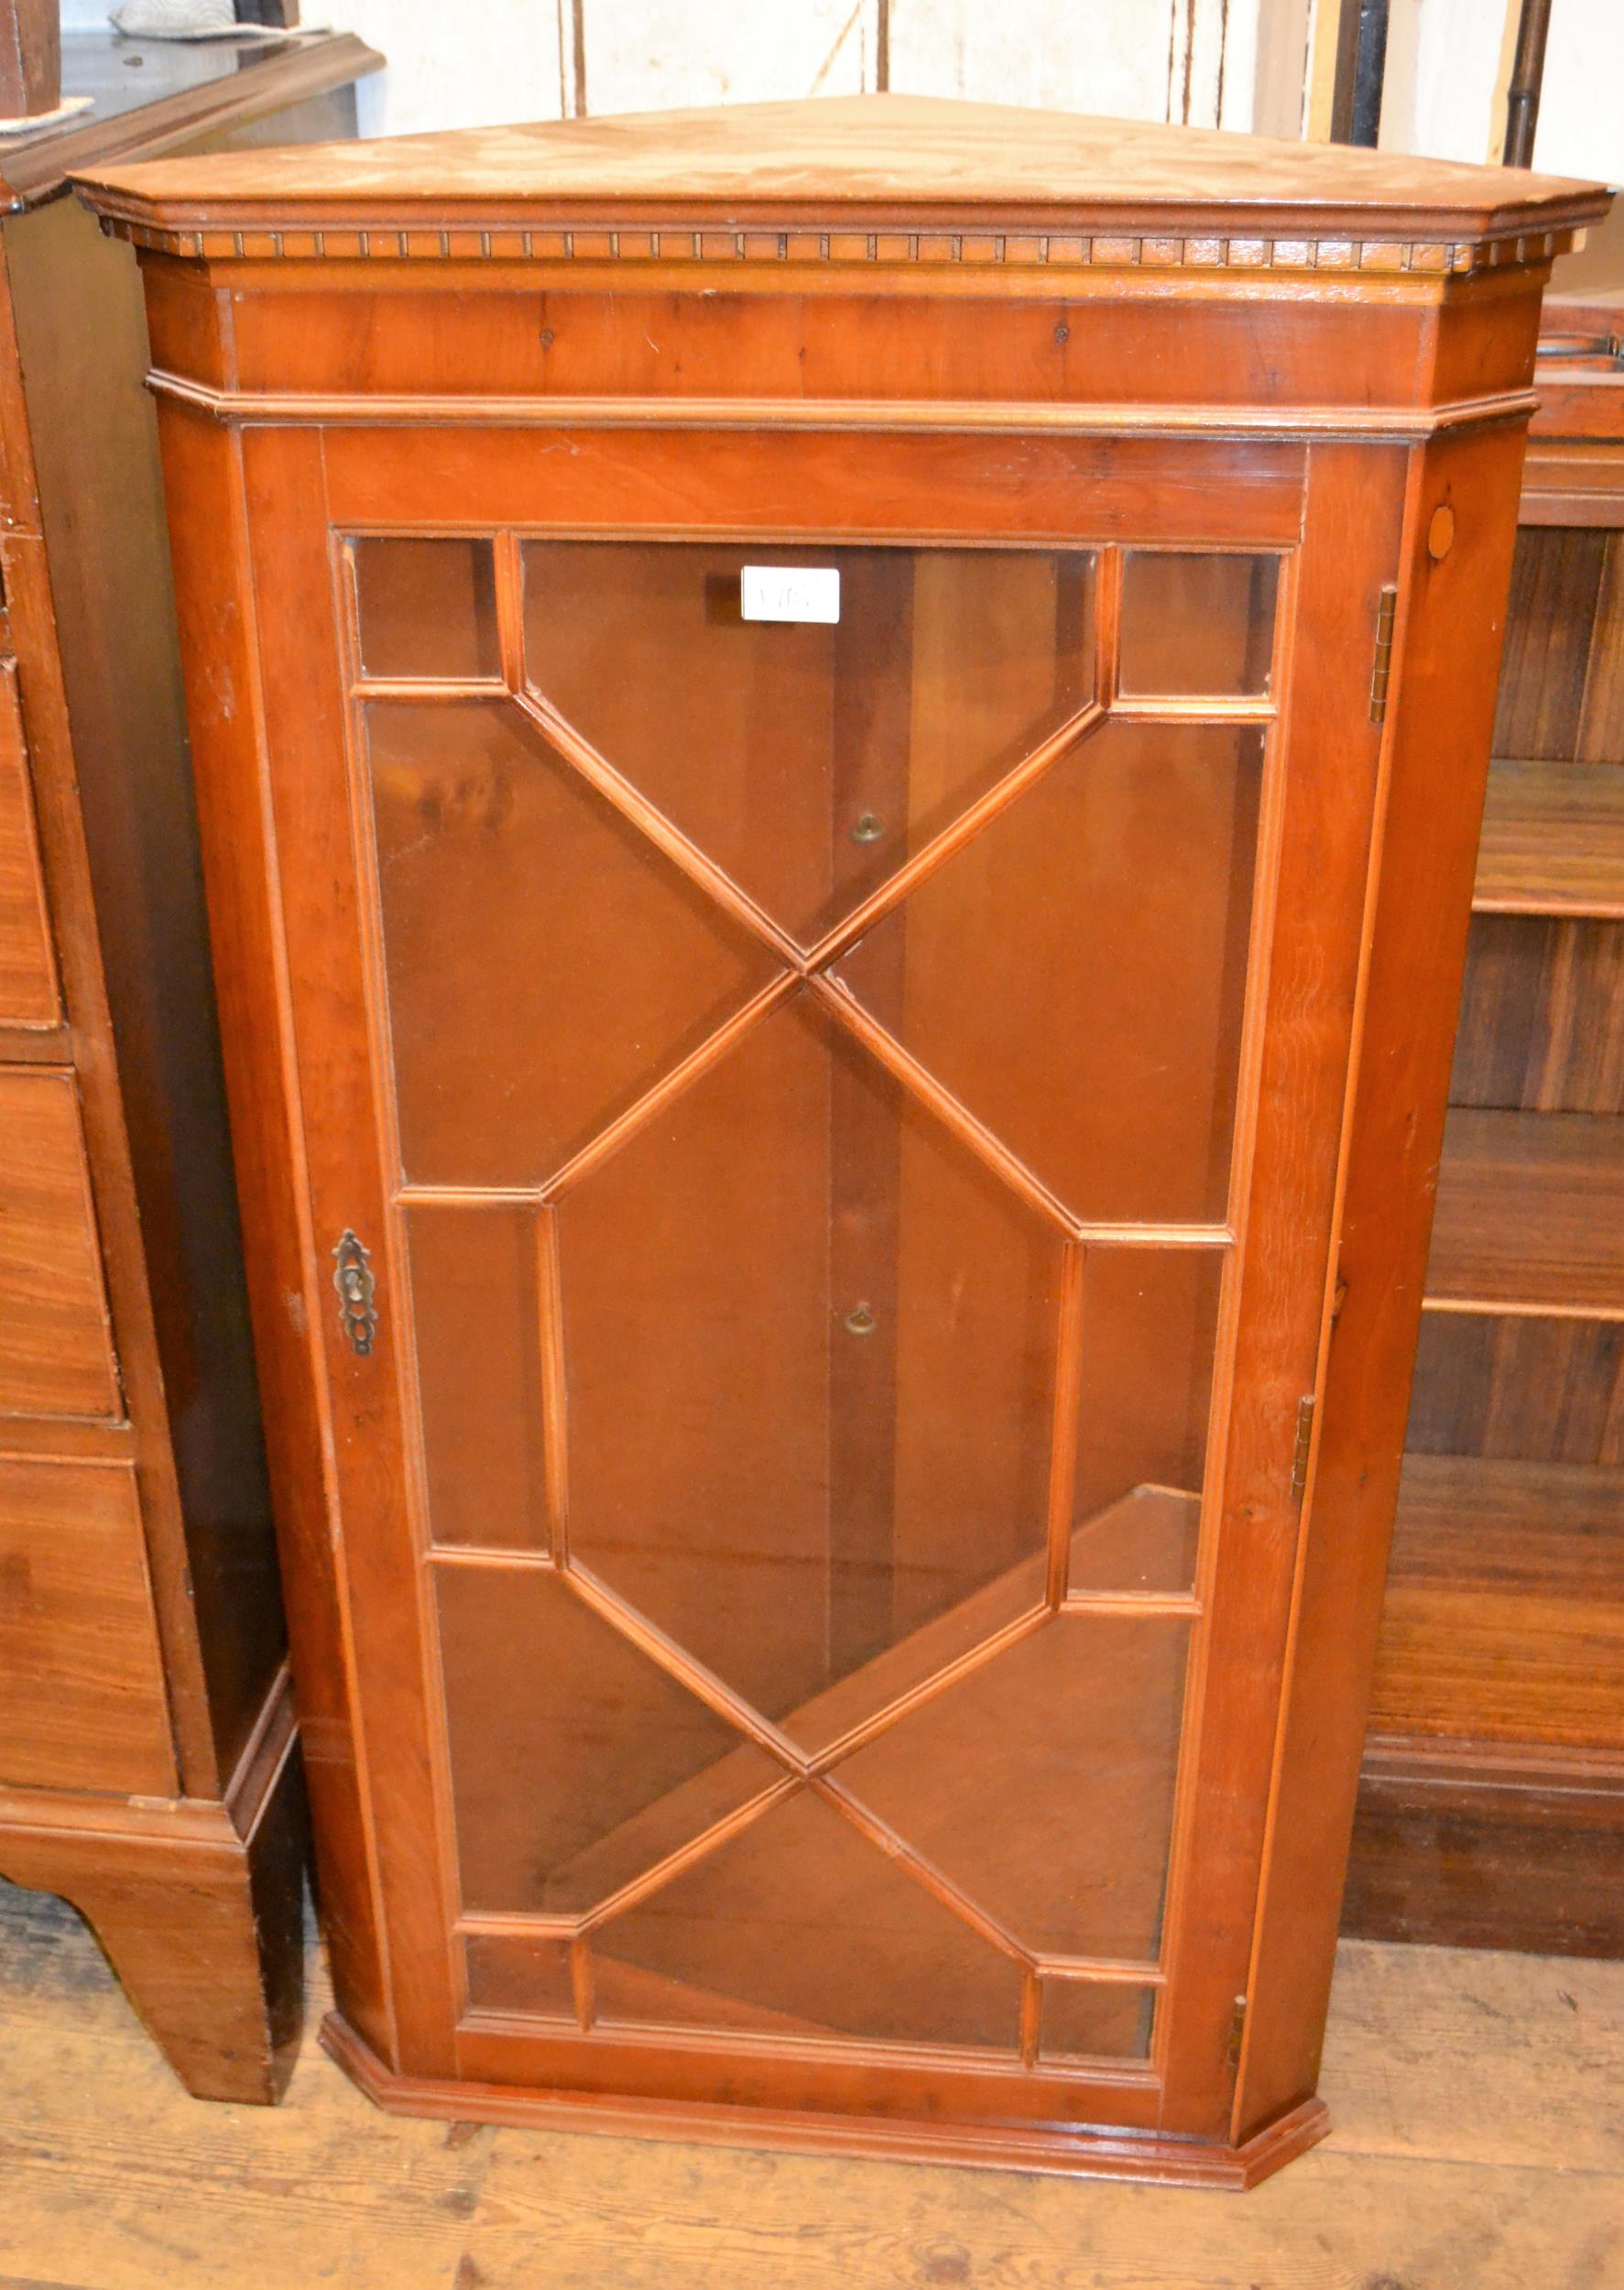 Reproduction yew wood four drawer serpentine shaped chest, together with a similar corner cabinet - Image 2 of 2